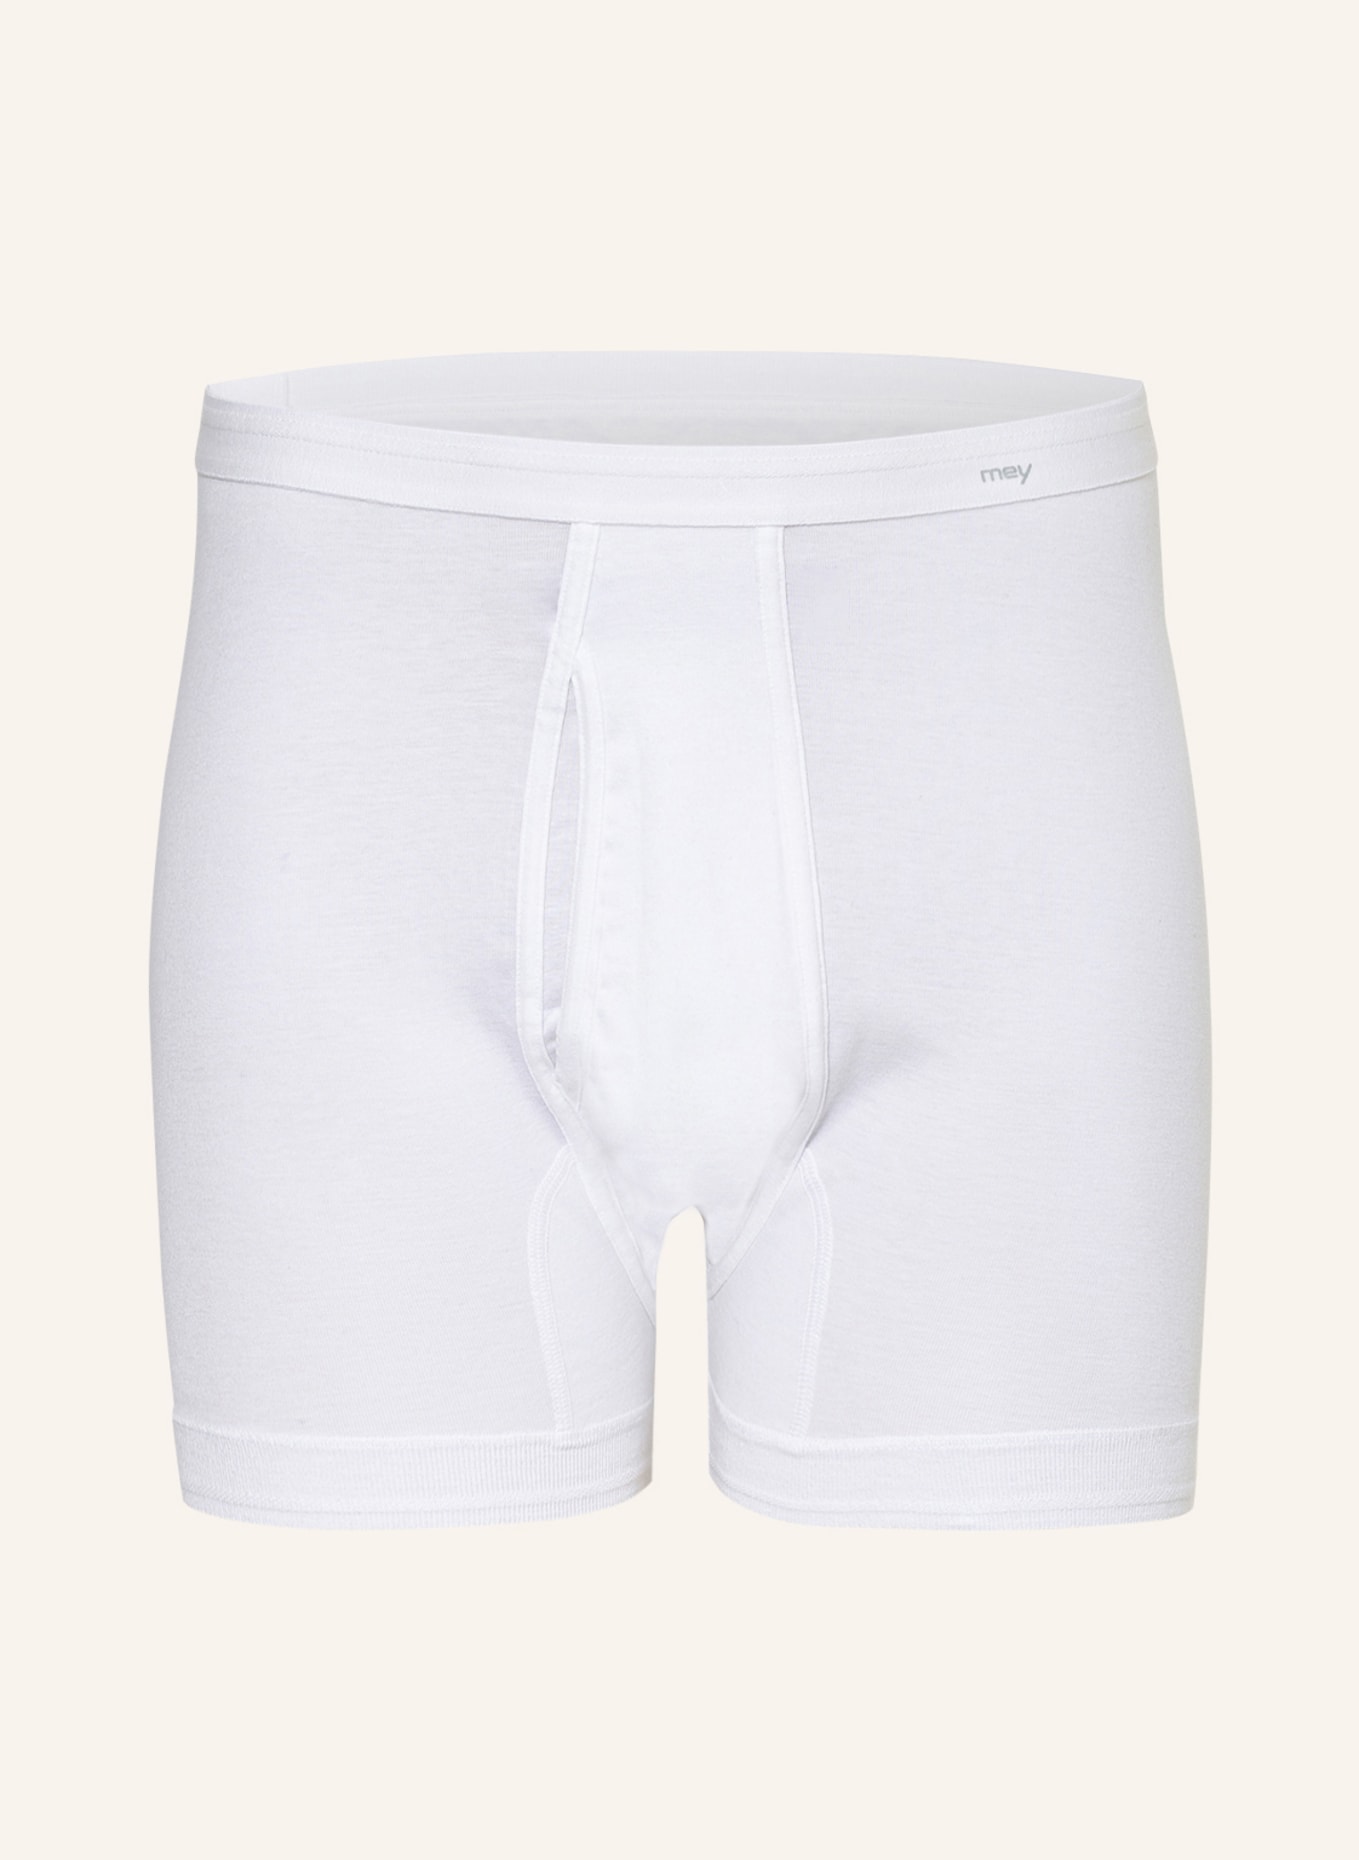 mey Boxer shorts series NOBLESSE, Color: WHITE (Image 1)